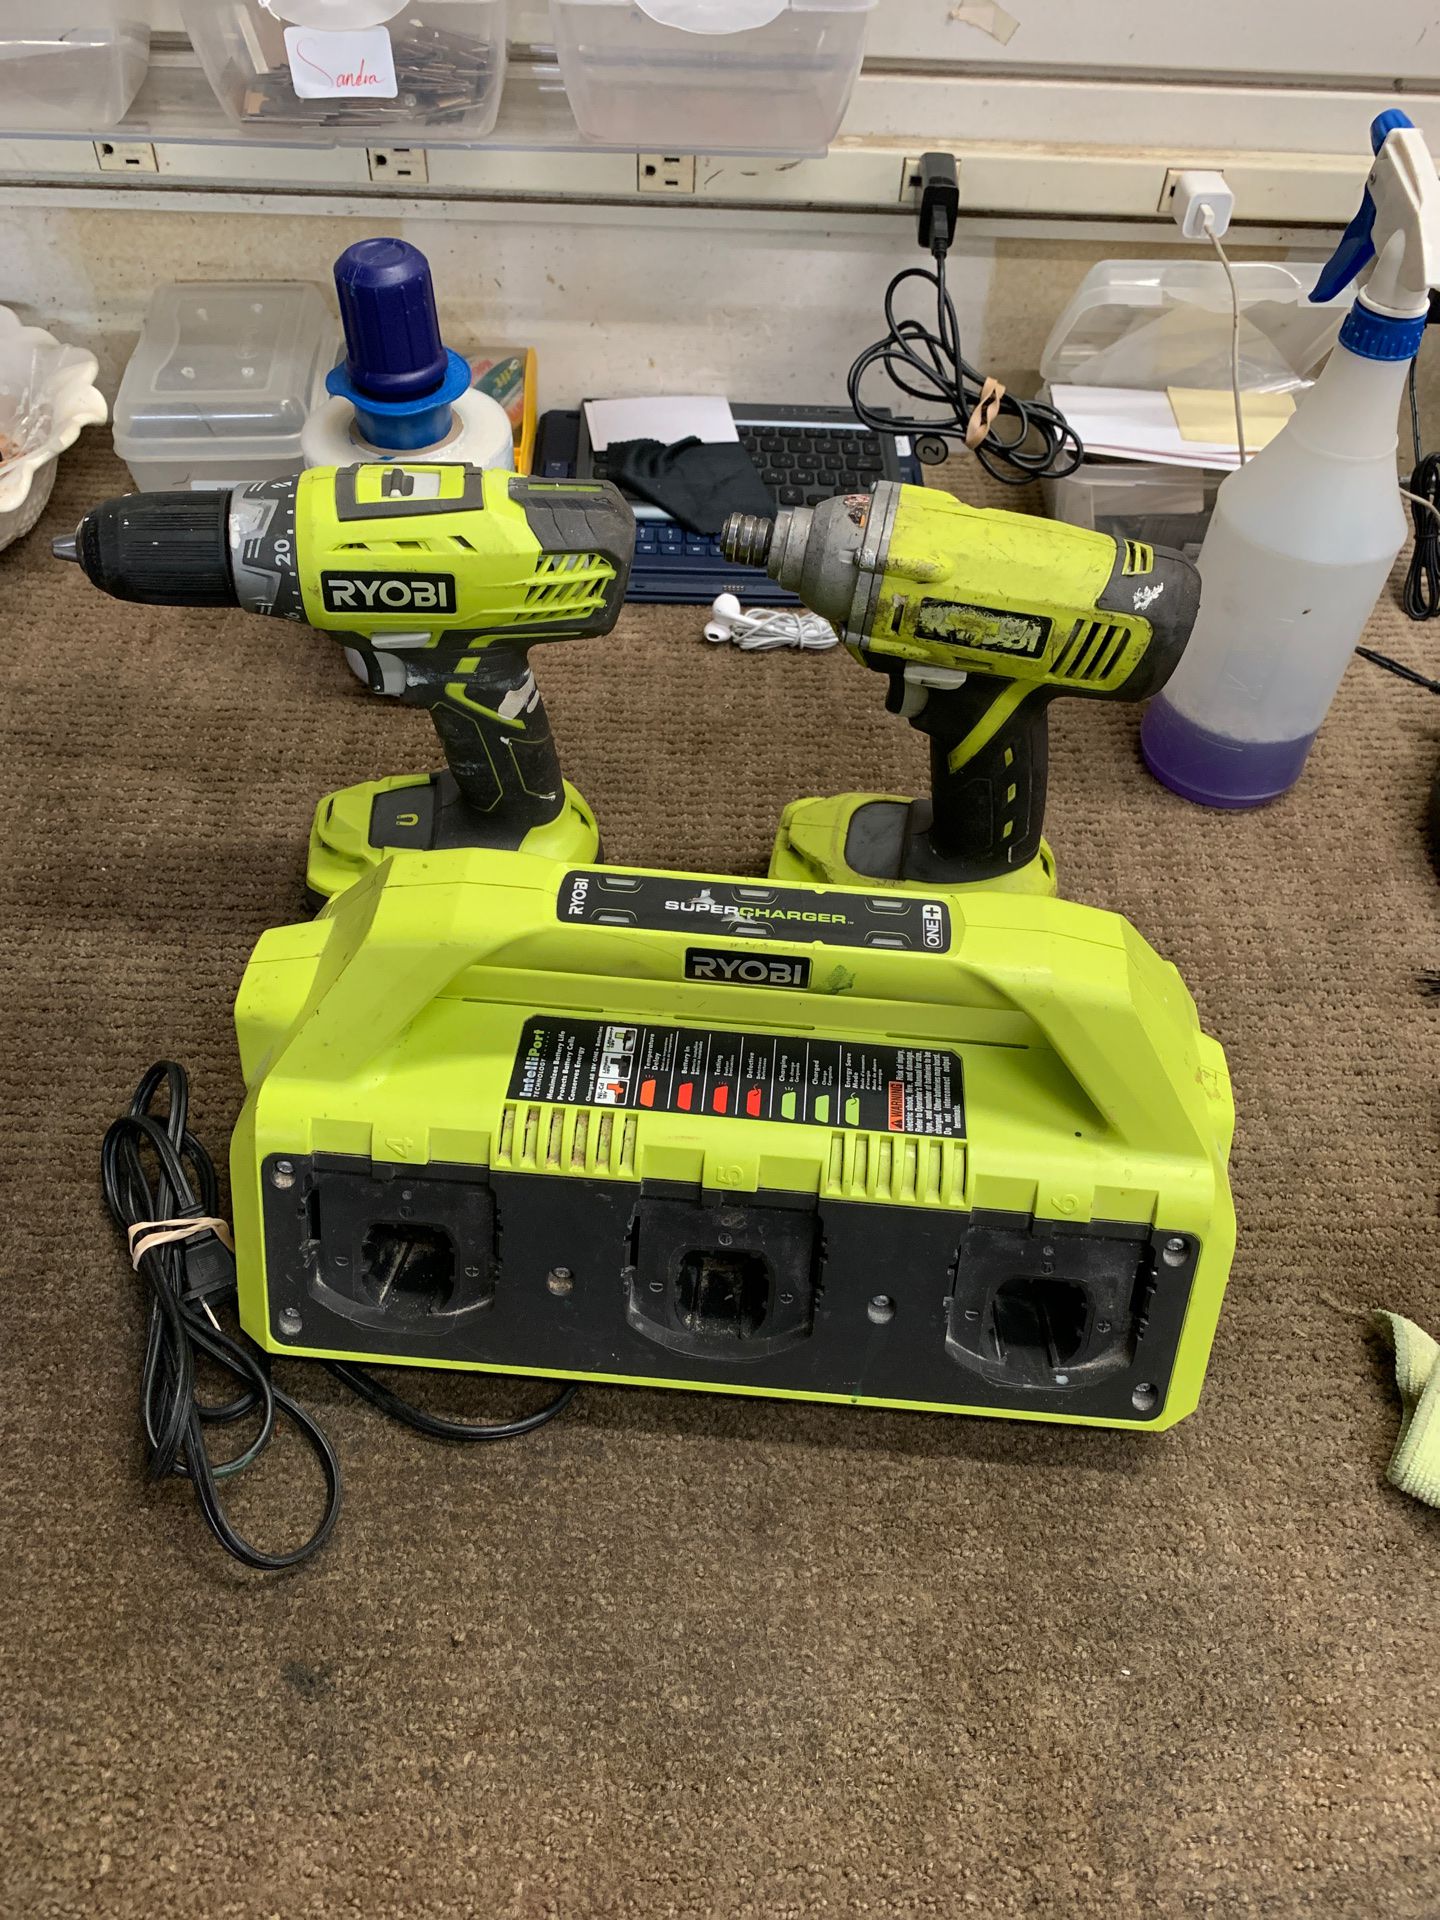 Fcp2344 ryobi drill with impact 2 battery & charger